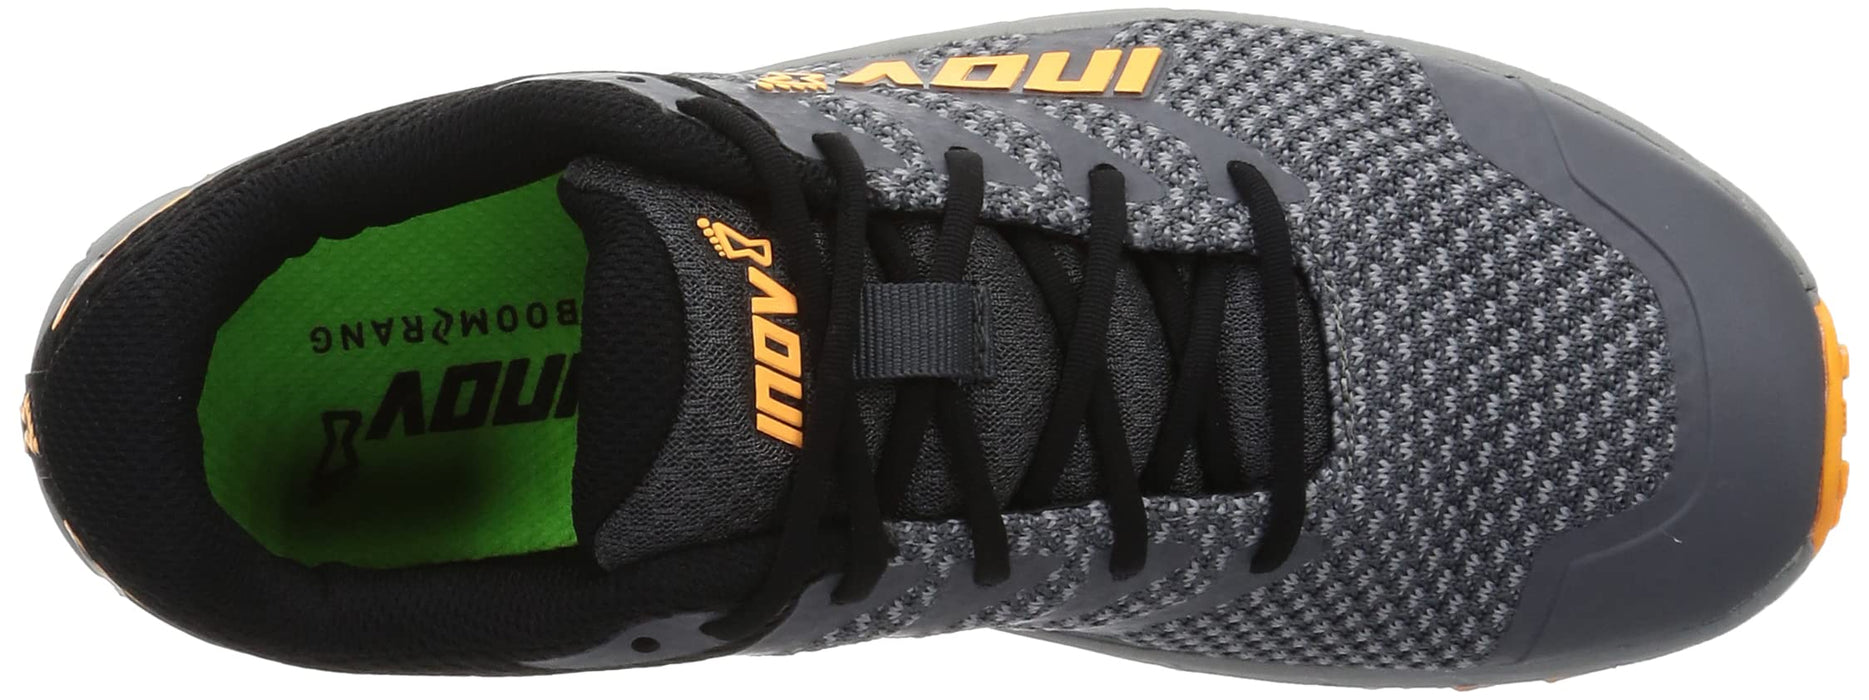 Inov-8 Men's Parkclaw 260 Knit Grey/Black/Yellow Size 8 Trail Running Shoes